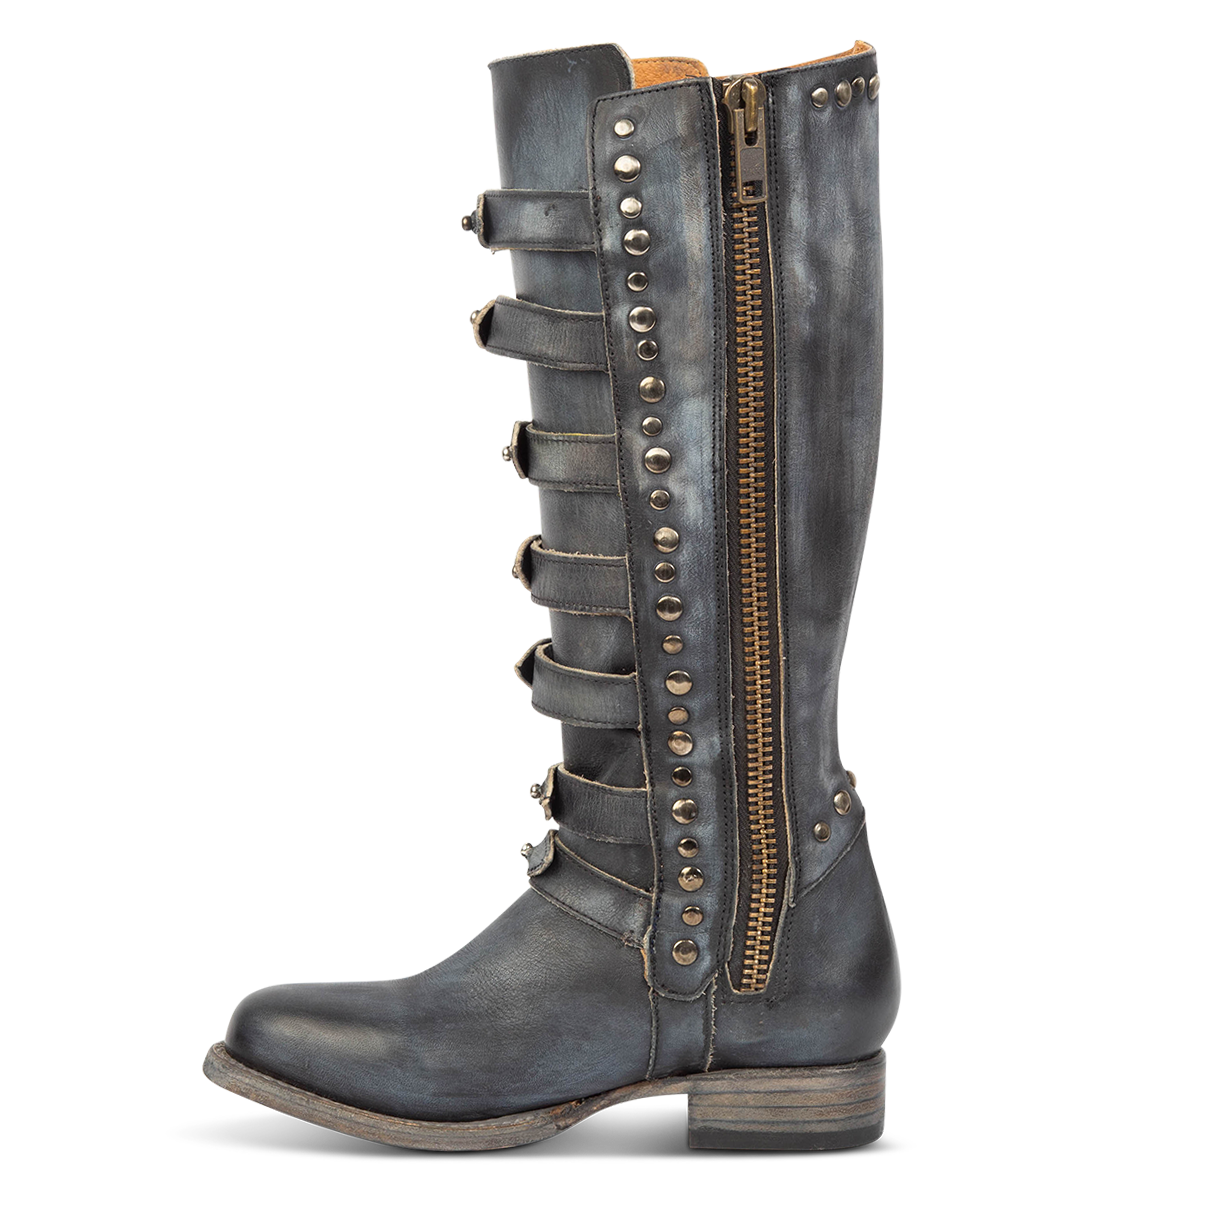 FREEBIRD women's Rory navy leather boot with leather straps stacking up the front shaft and inside zip closure 